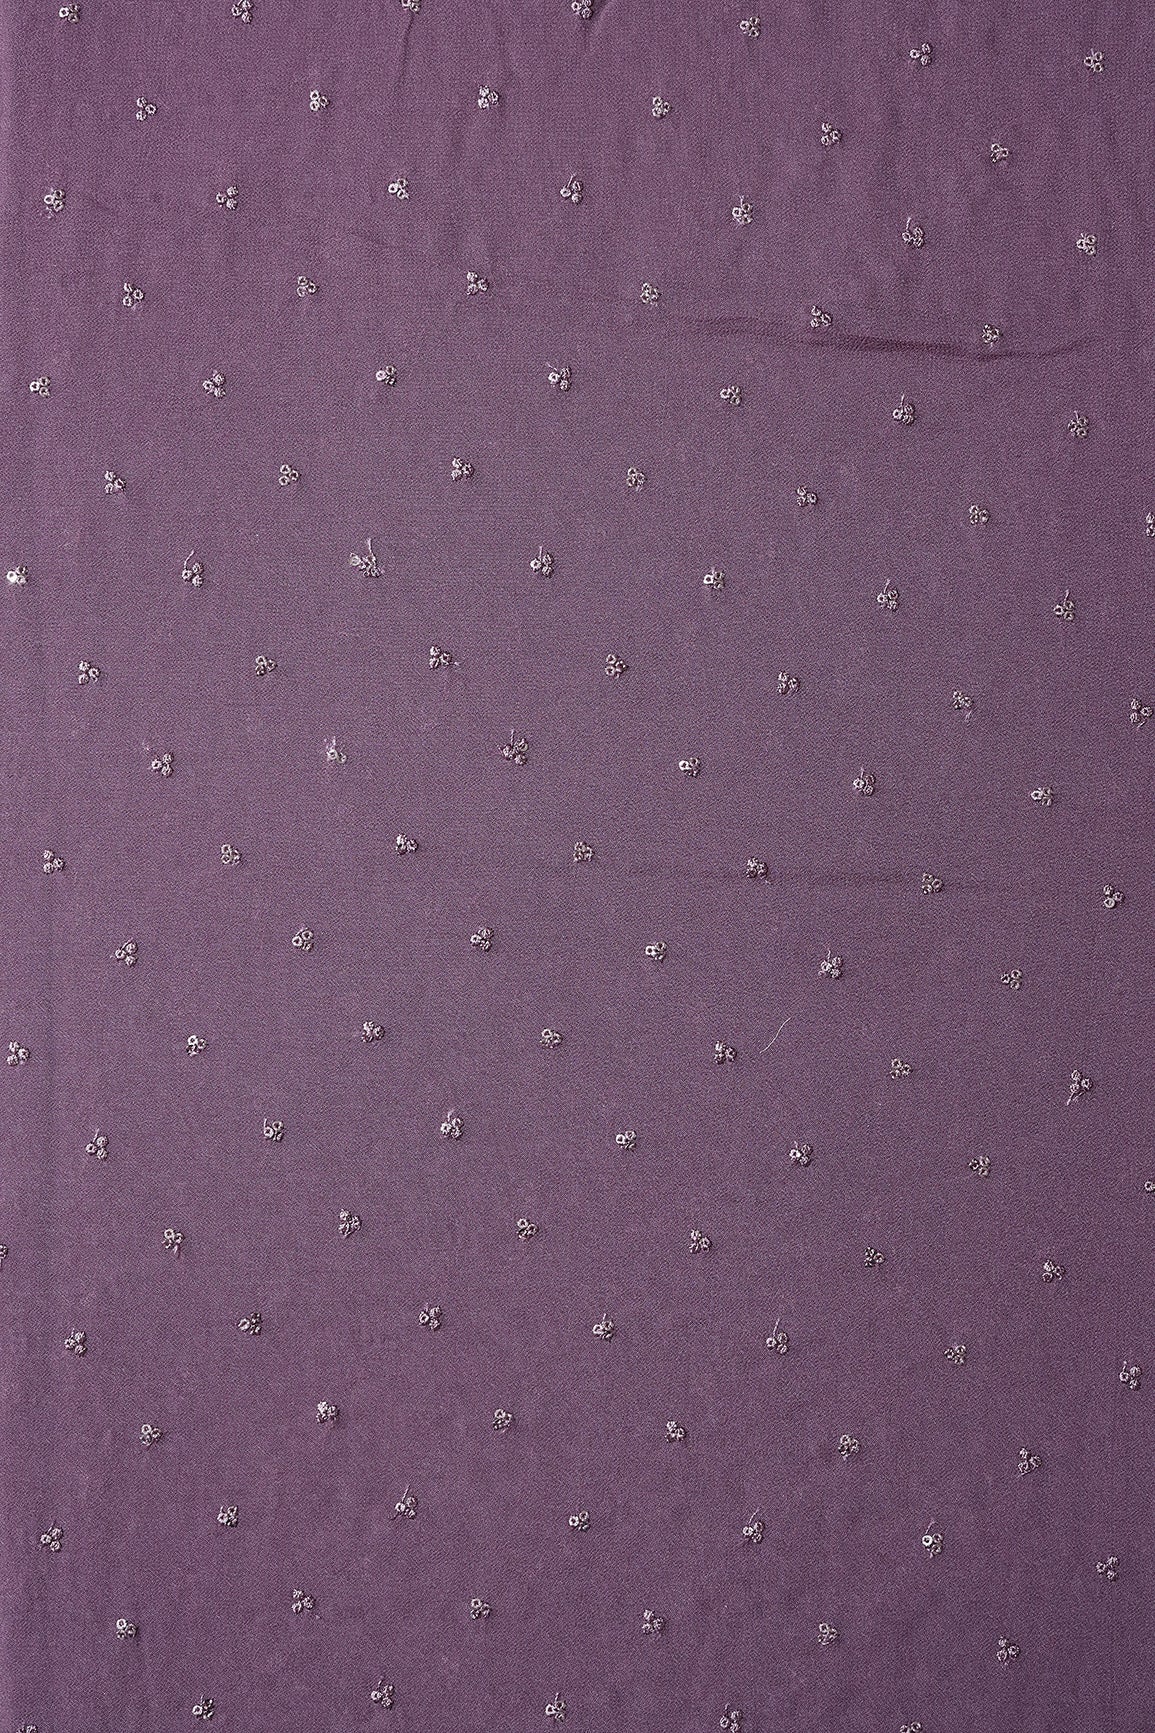 Small Motif Sequins Embroidery On Voila Purple Viscose Georgette Fabric - doeraa